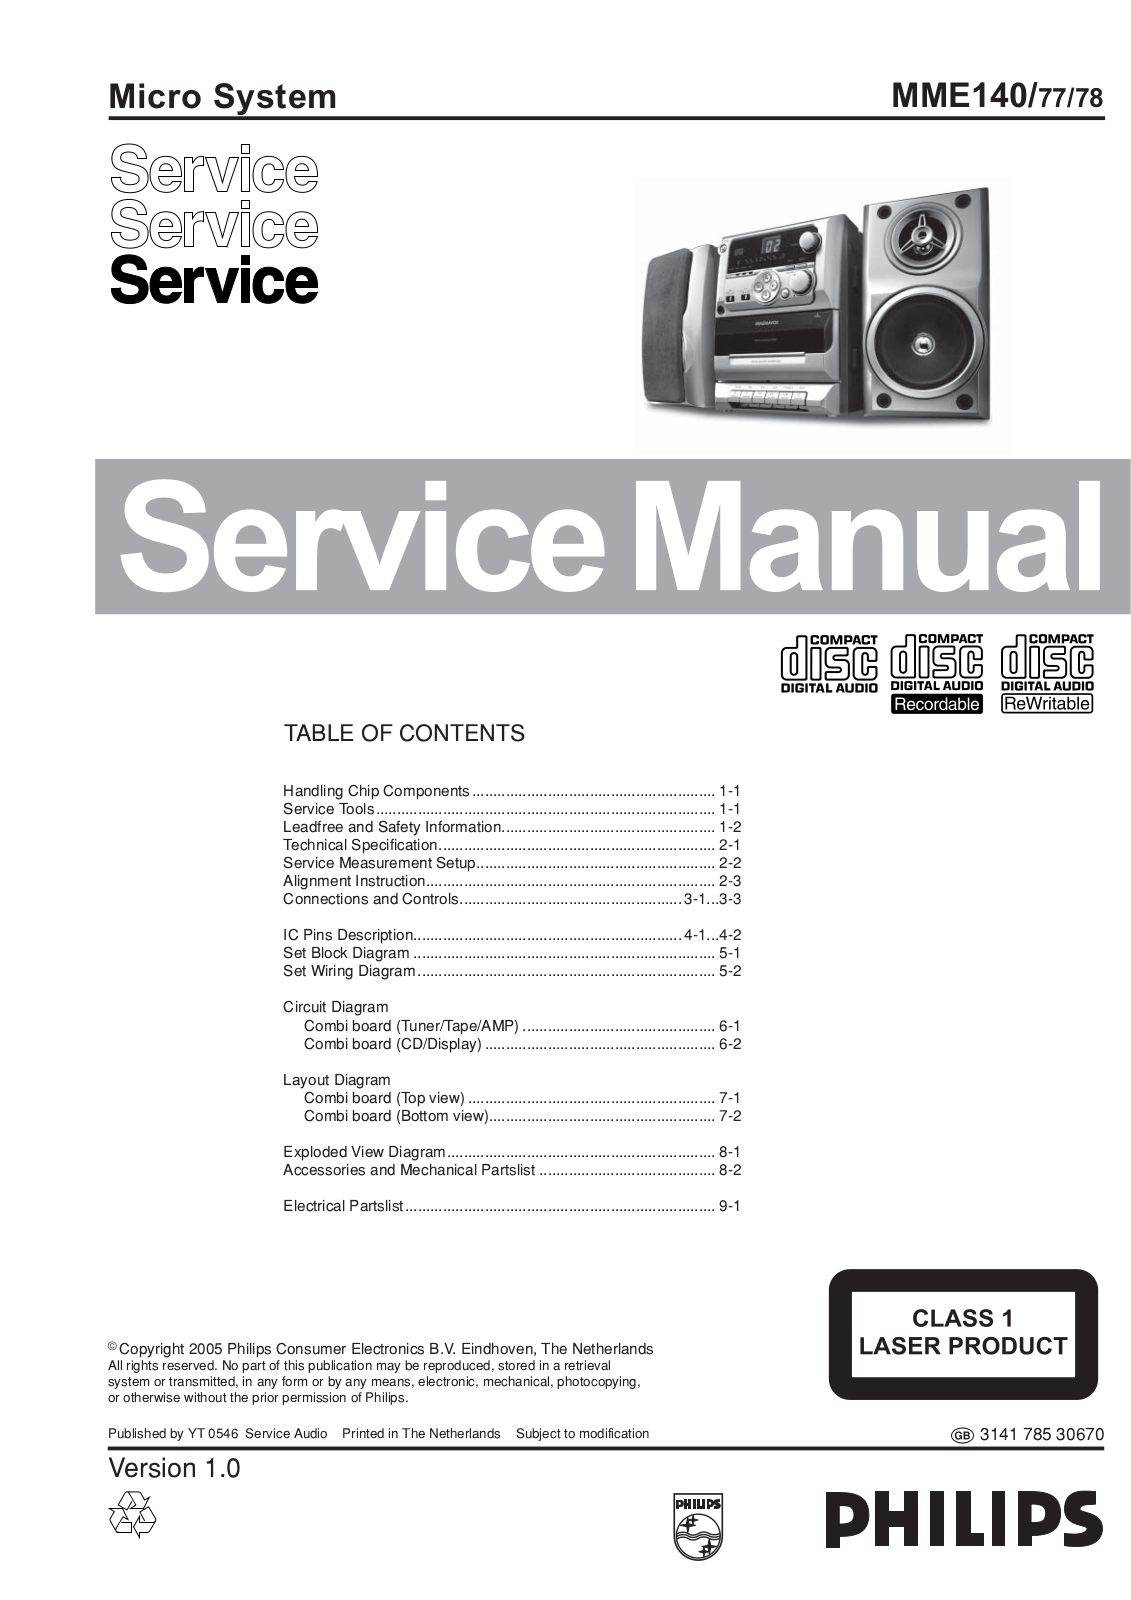 Philips MME-140 Service Manual